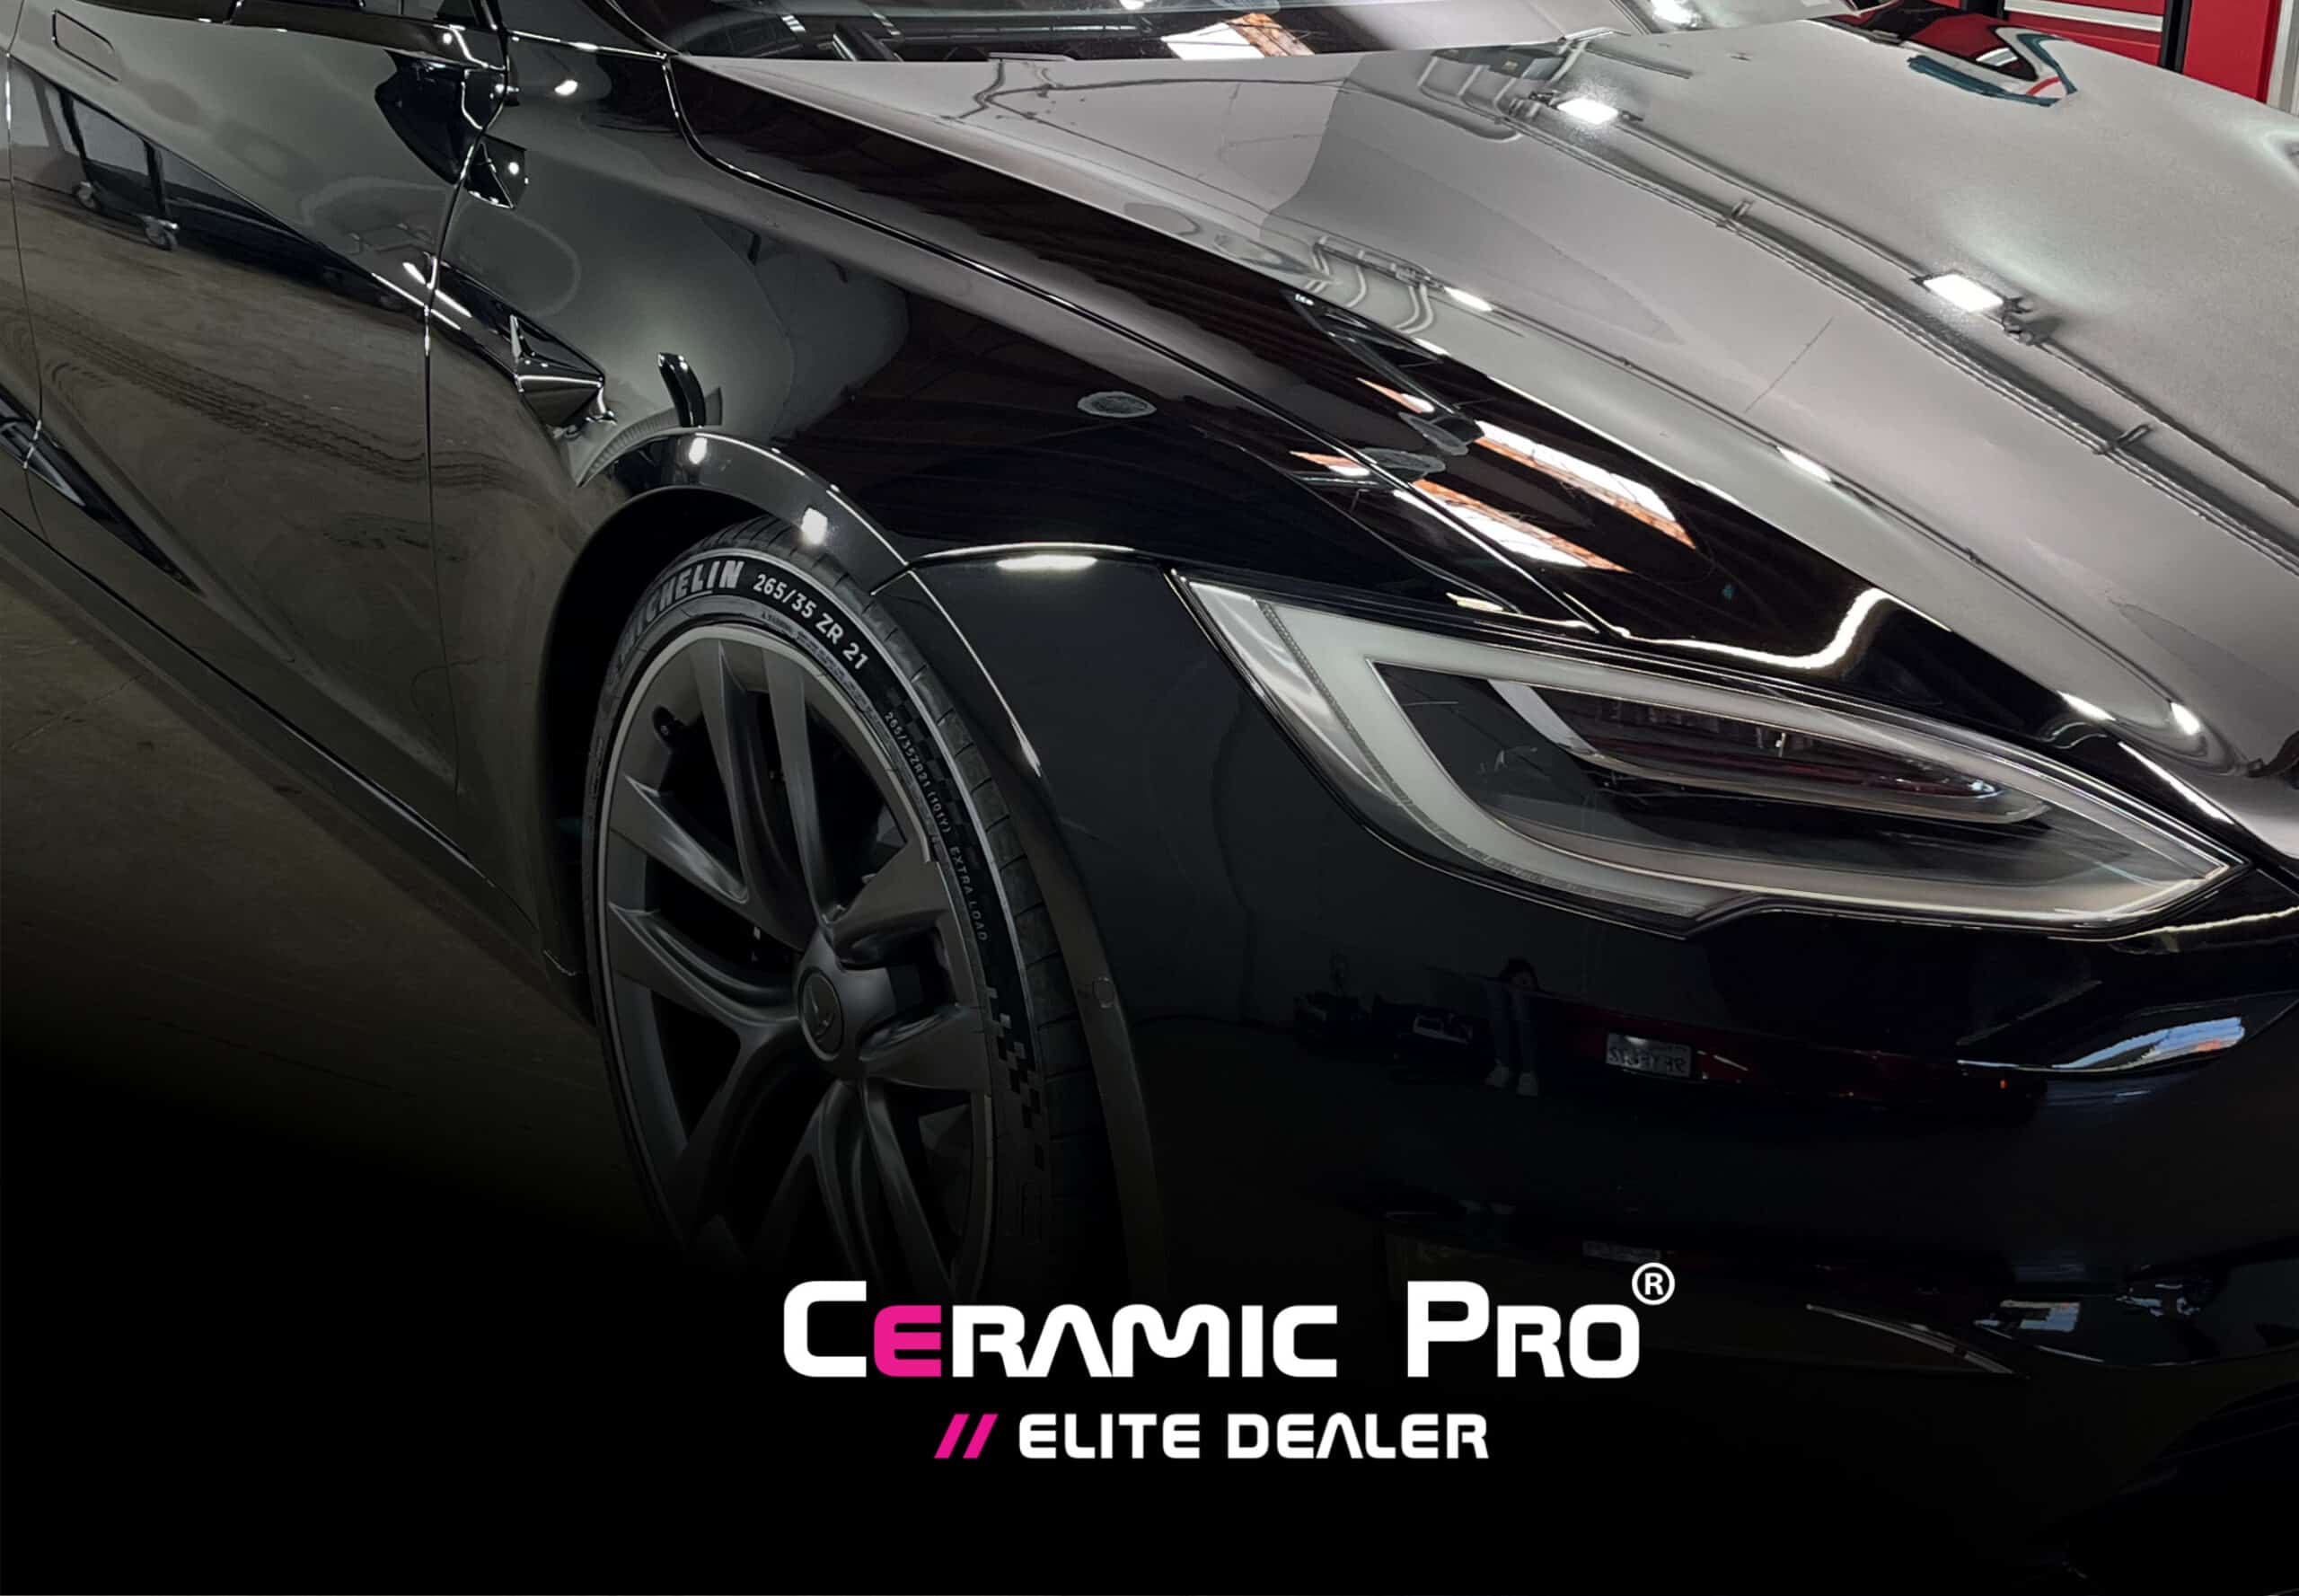 Ceramic Coatings - Professional Coating Installer - Get A Quote Today